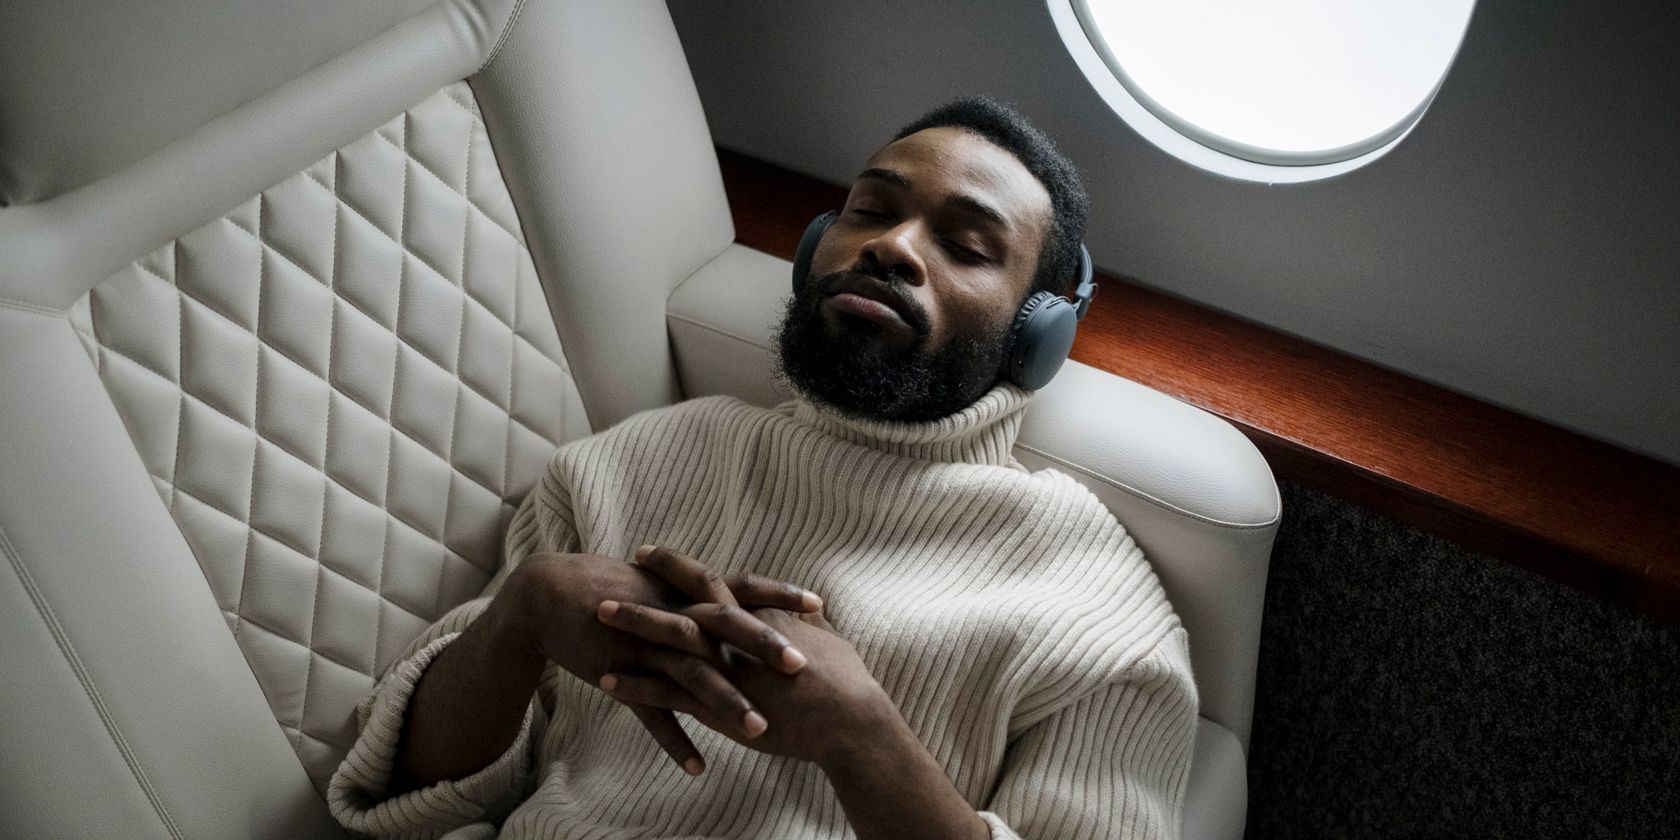 A man in white pullover sitting in a white chair listening to headphones